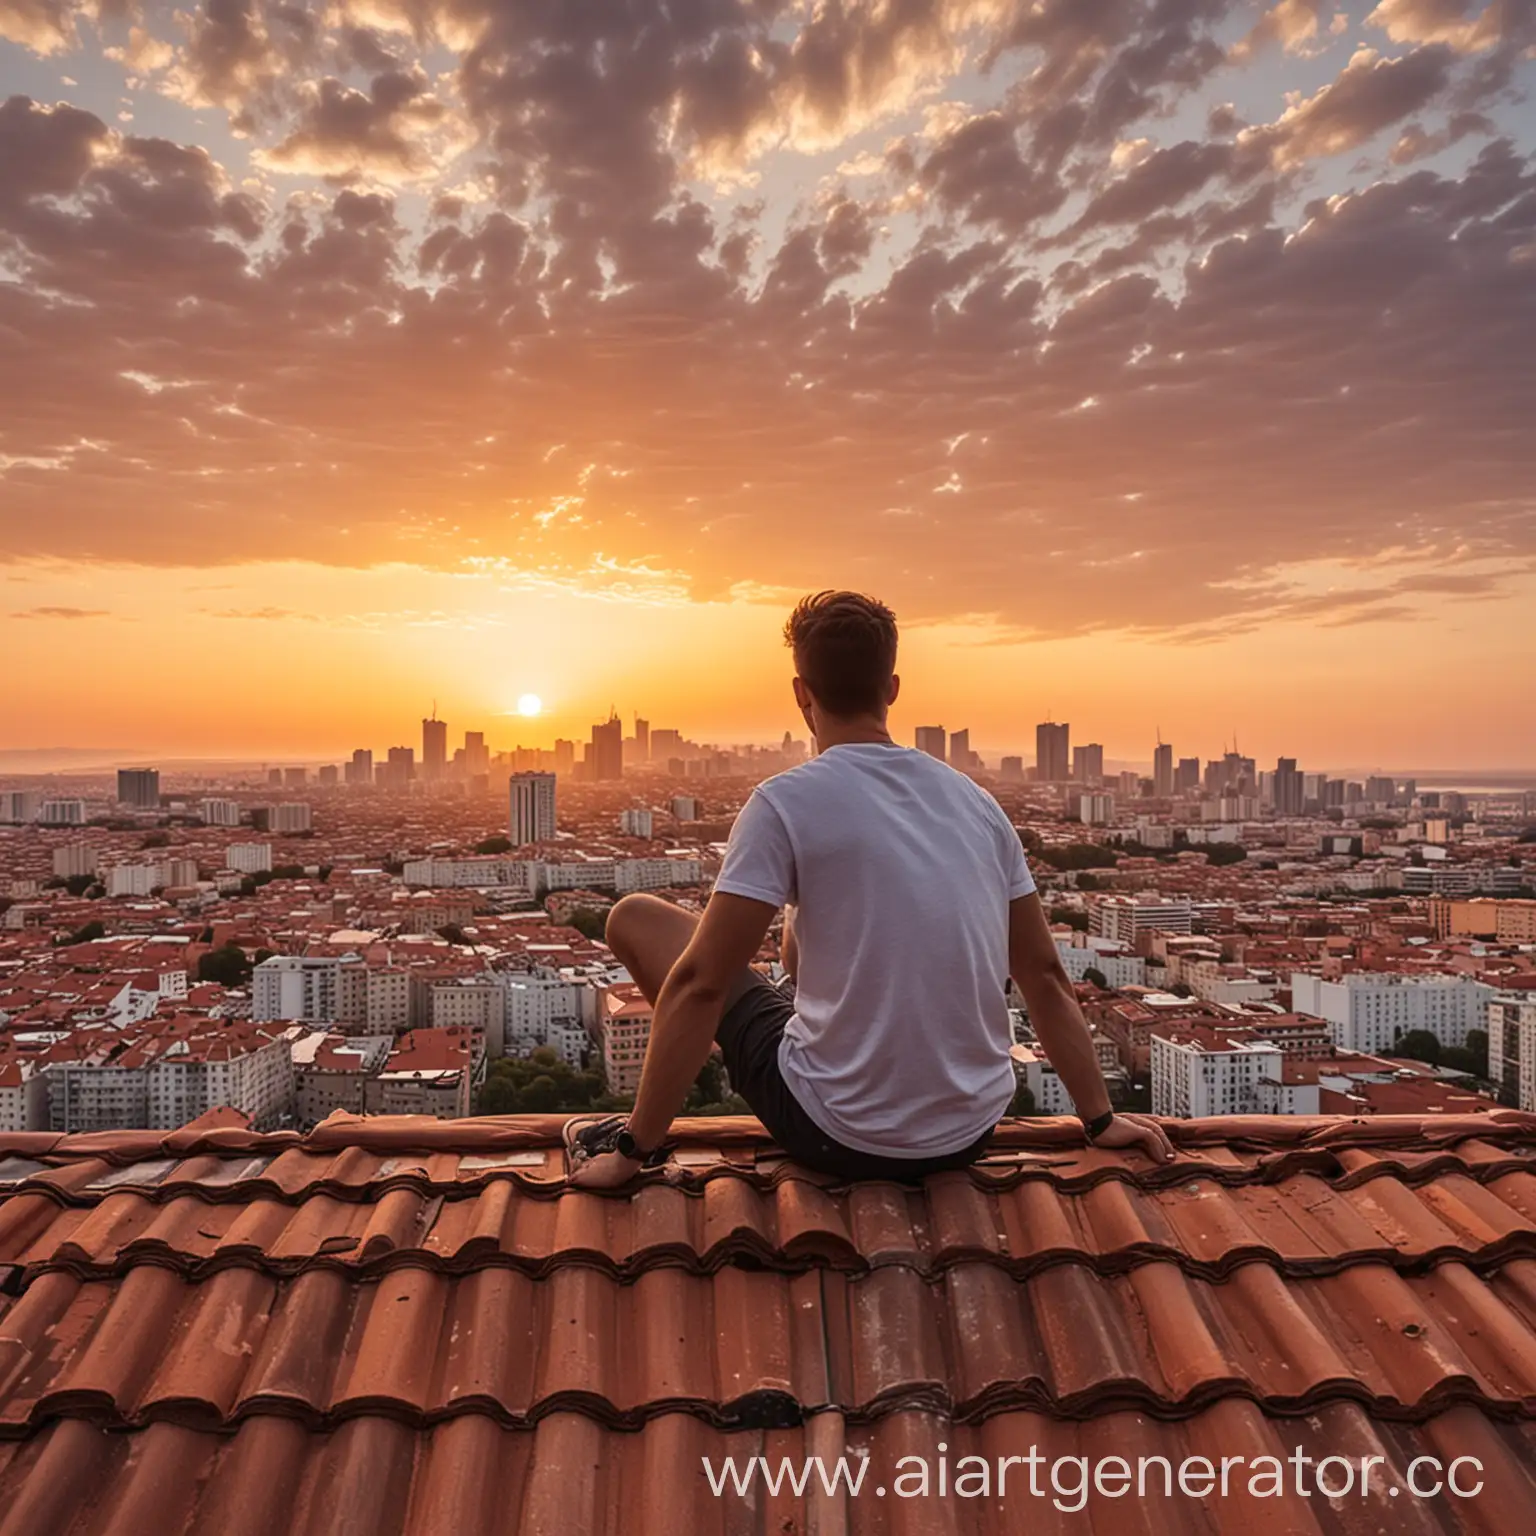 Man-Enjoying-Sunset-Views-from-Rooftop-Overlooking-Cityscape